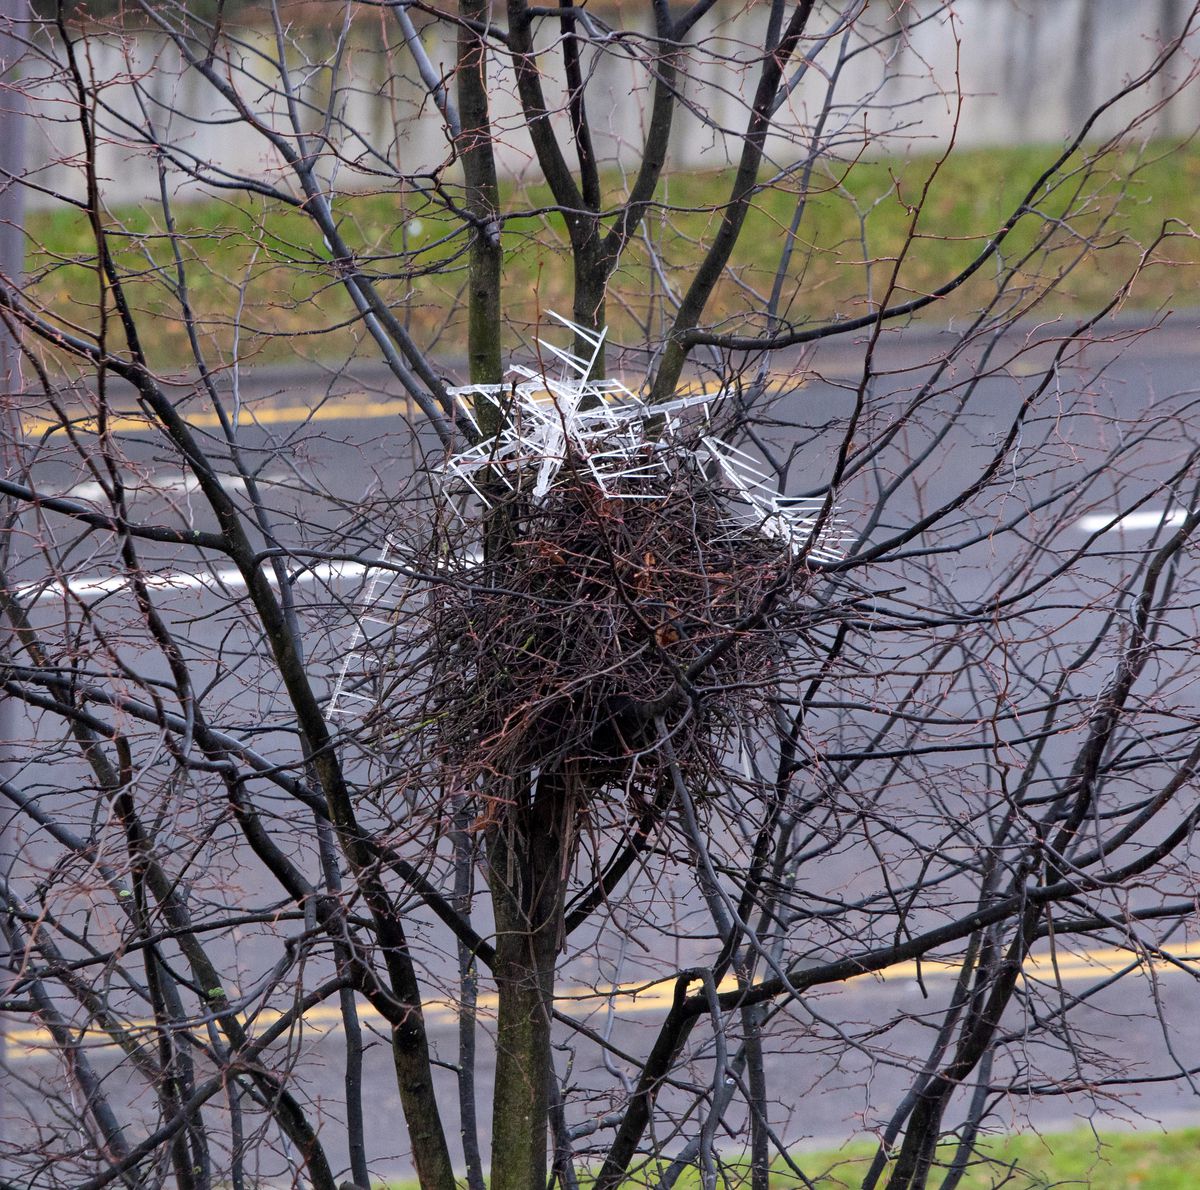 A nest from Scotland shows how urban magpies are using anti-bird spikes to construct a roof meant to protect their young and eggs from predators.